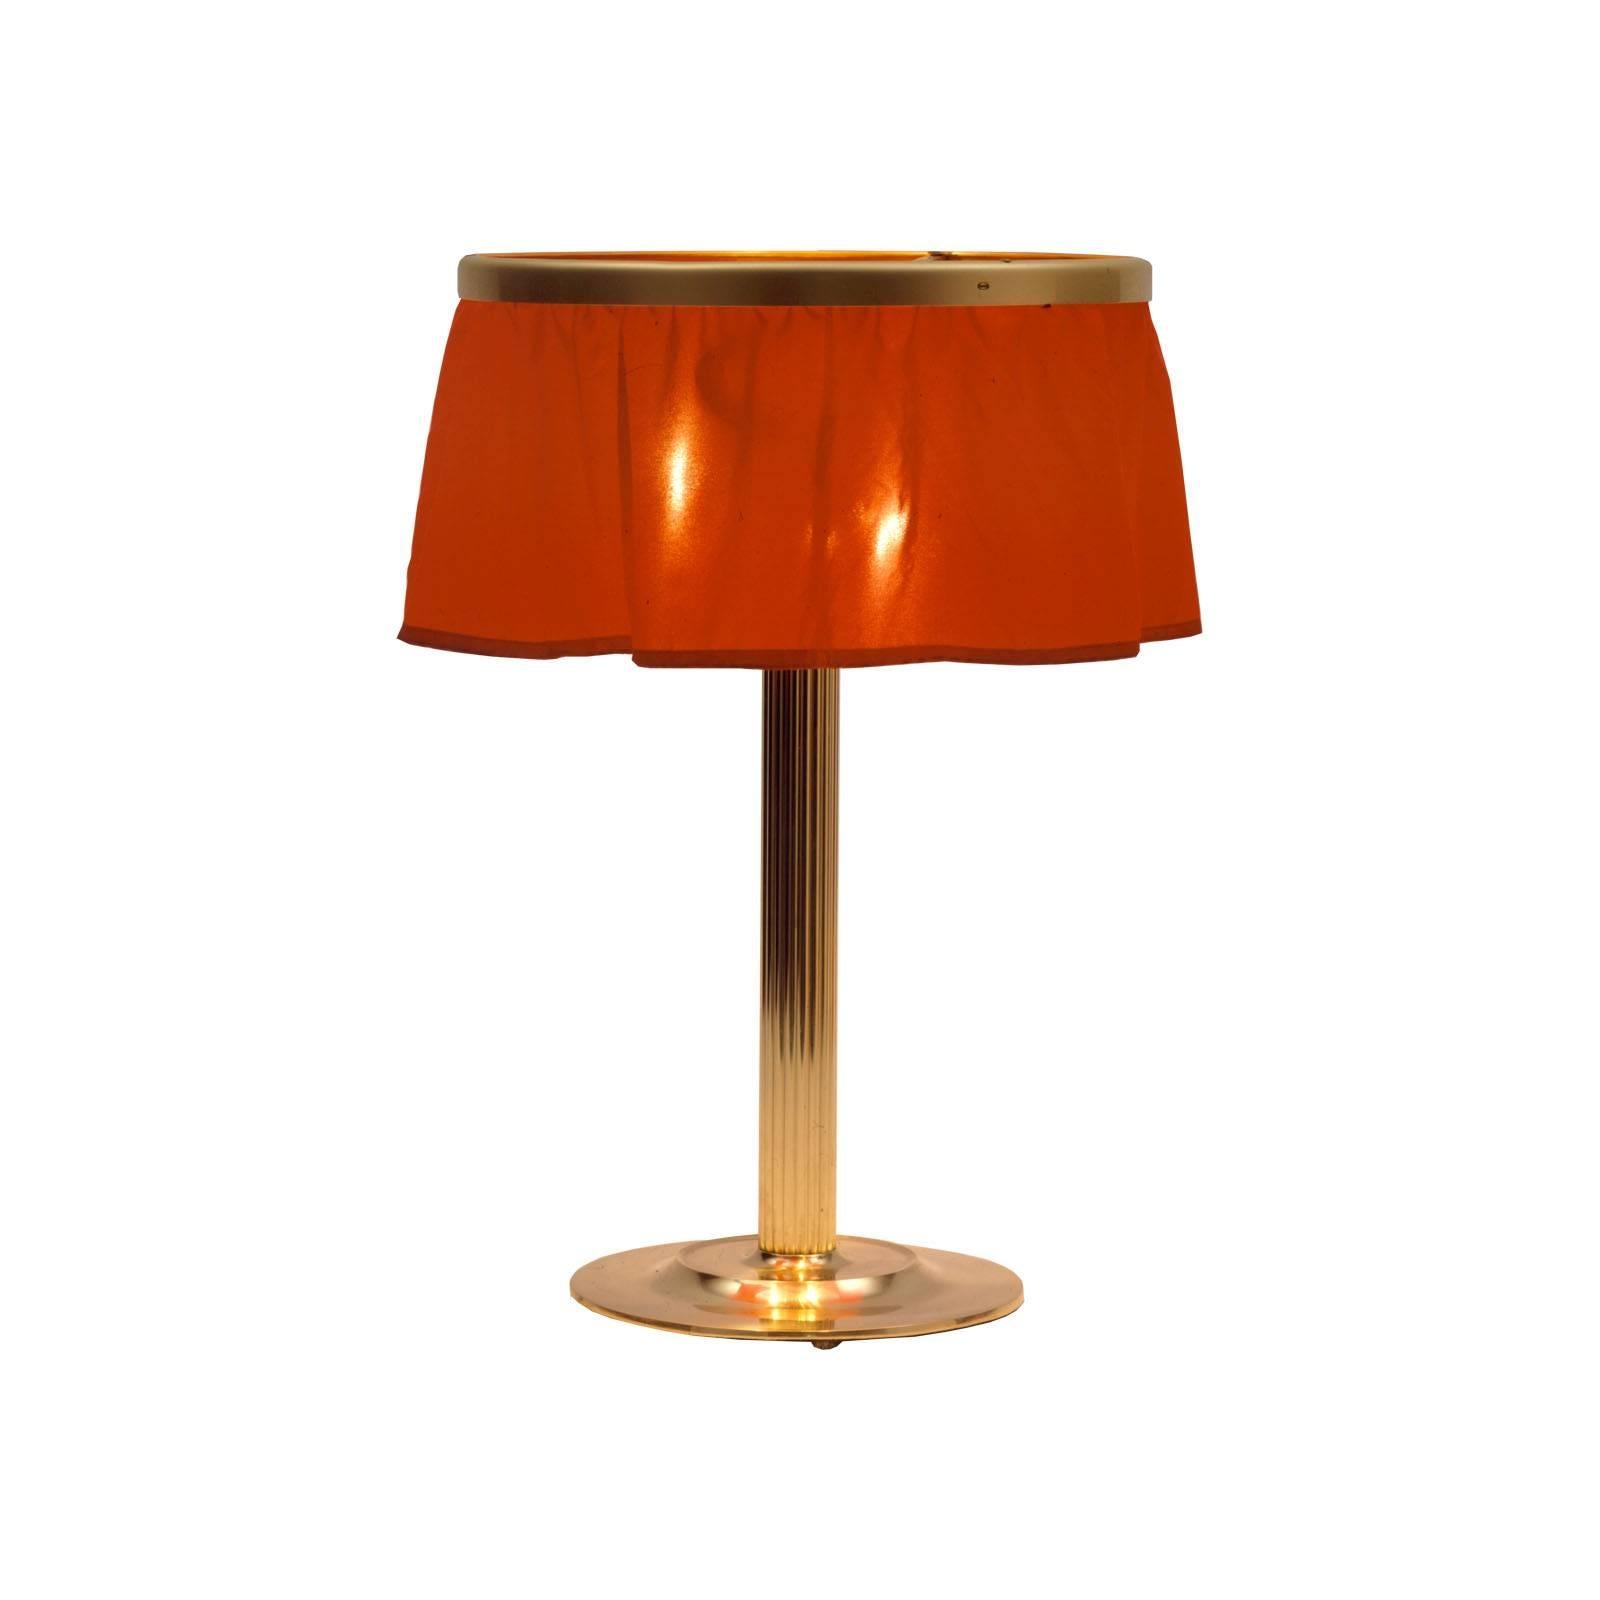 Brass lamp with the requested finish - the fabric can be delivered with a plugged - or with a leadband – border.
Originally manufactured at the Wiener Werkstätte, now manufactured at the WOKA workshop in Vienna

Most components according to the